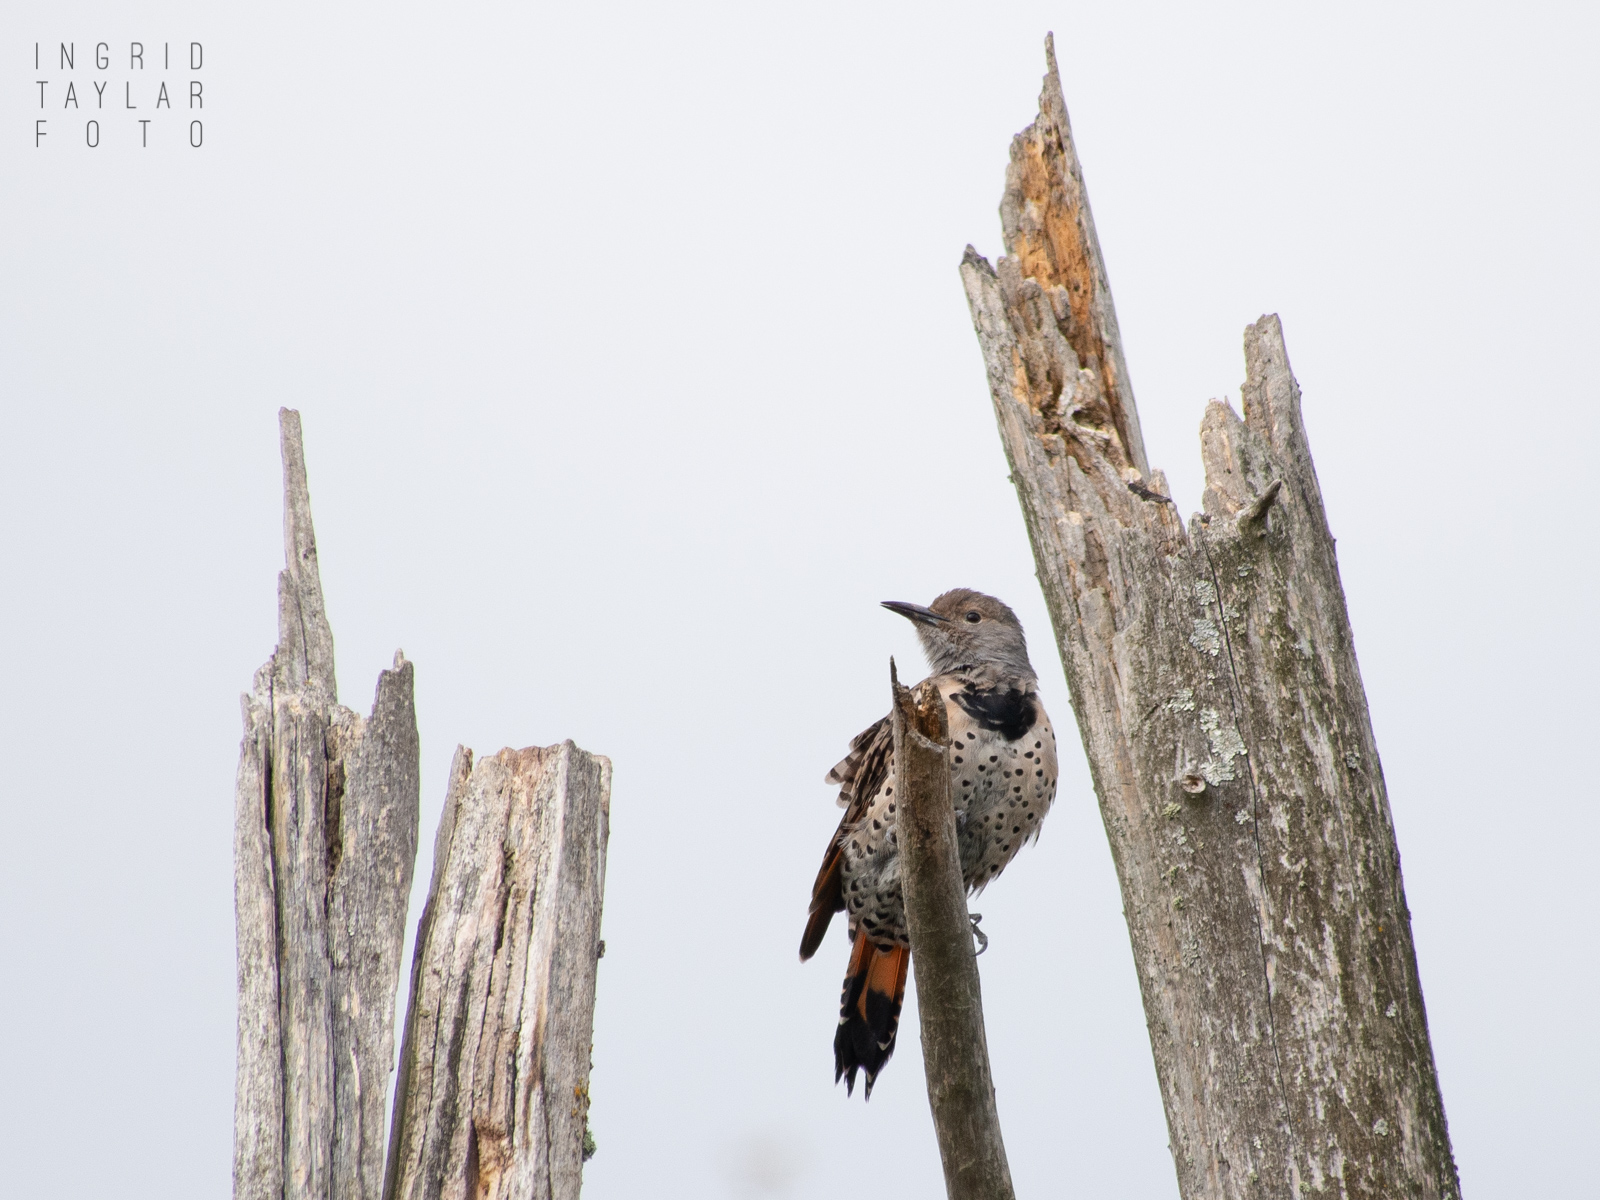 Northern Flicker on Tree Snag at Union Bay Natural Area